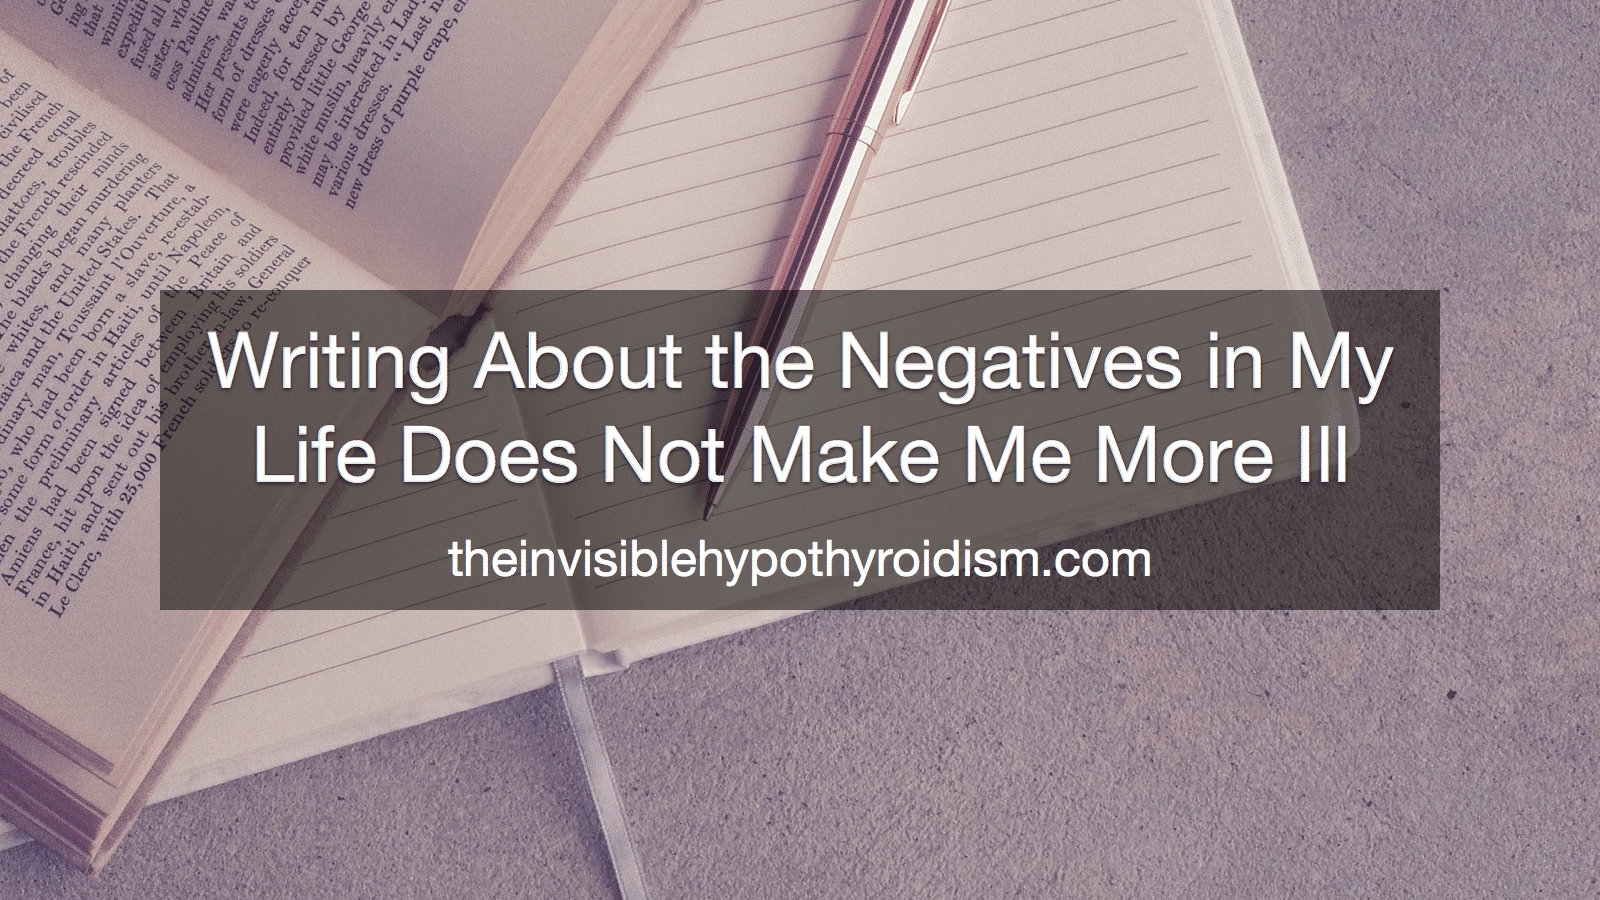 Writing About the Negatives in My Life Does Not Make Me 'More Ill'